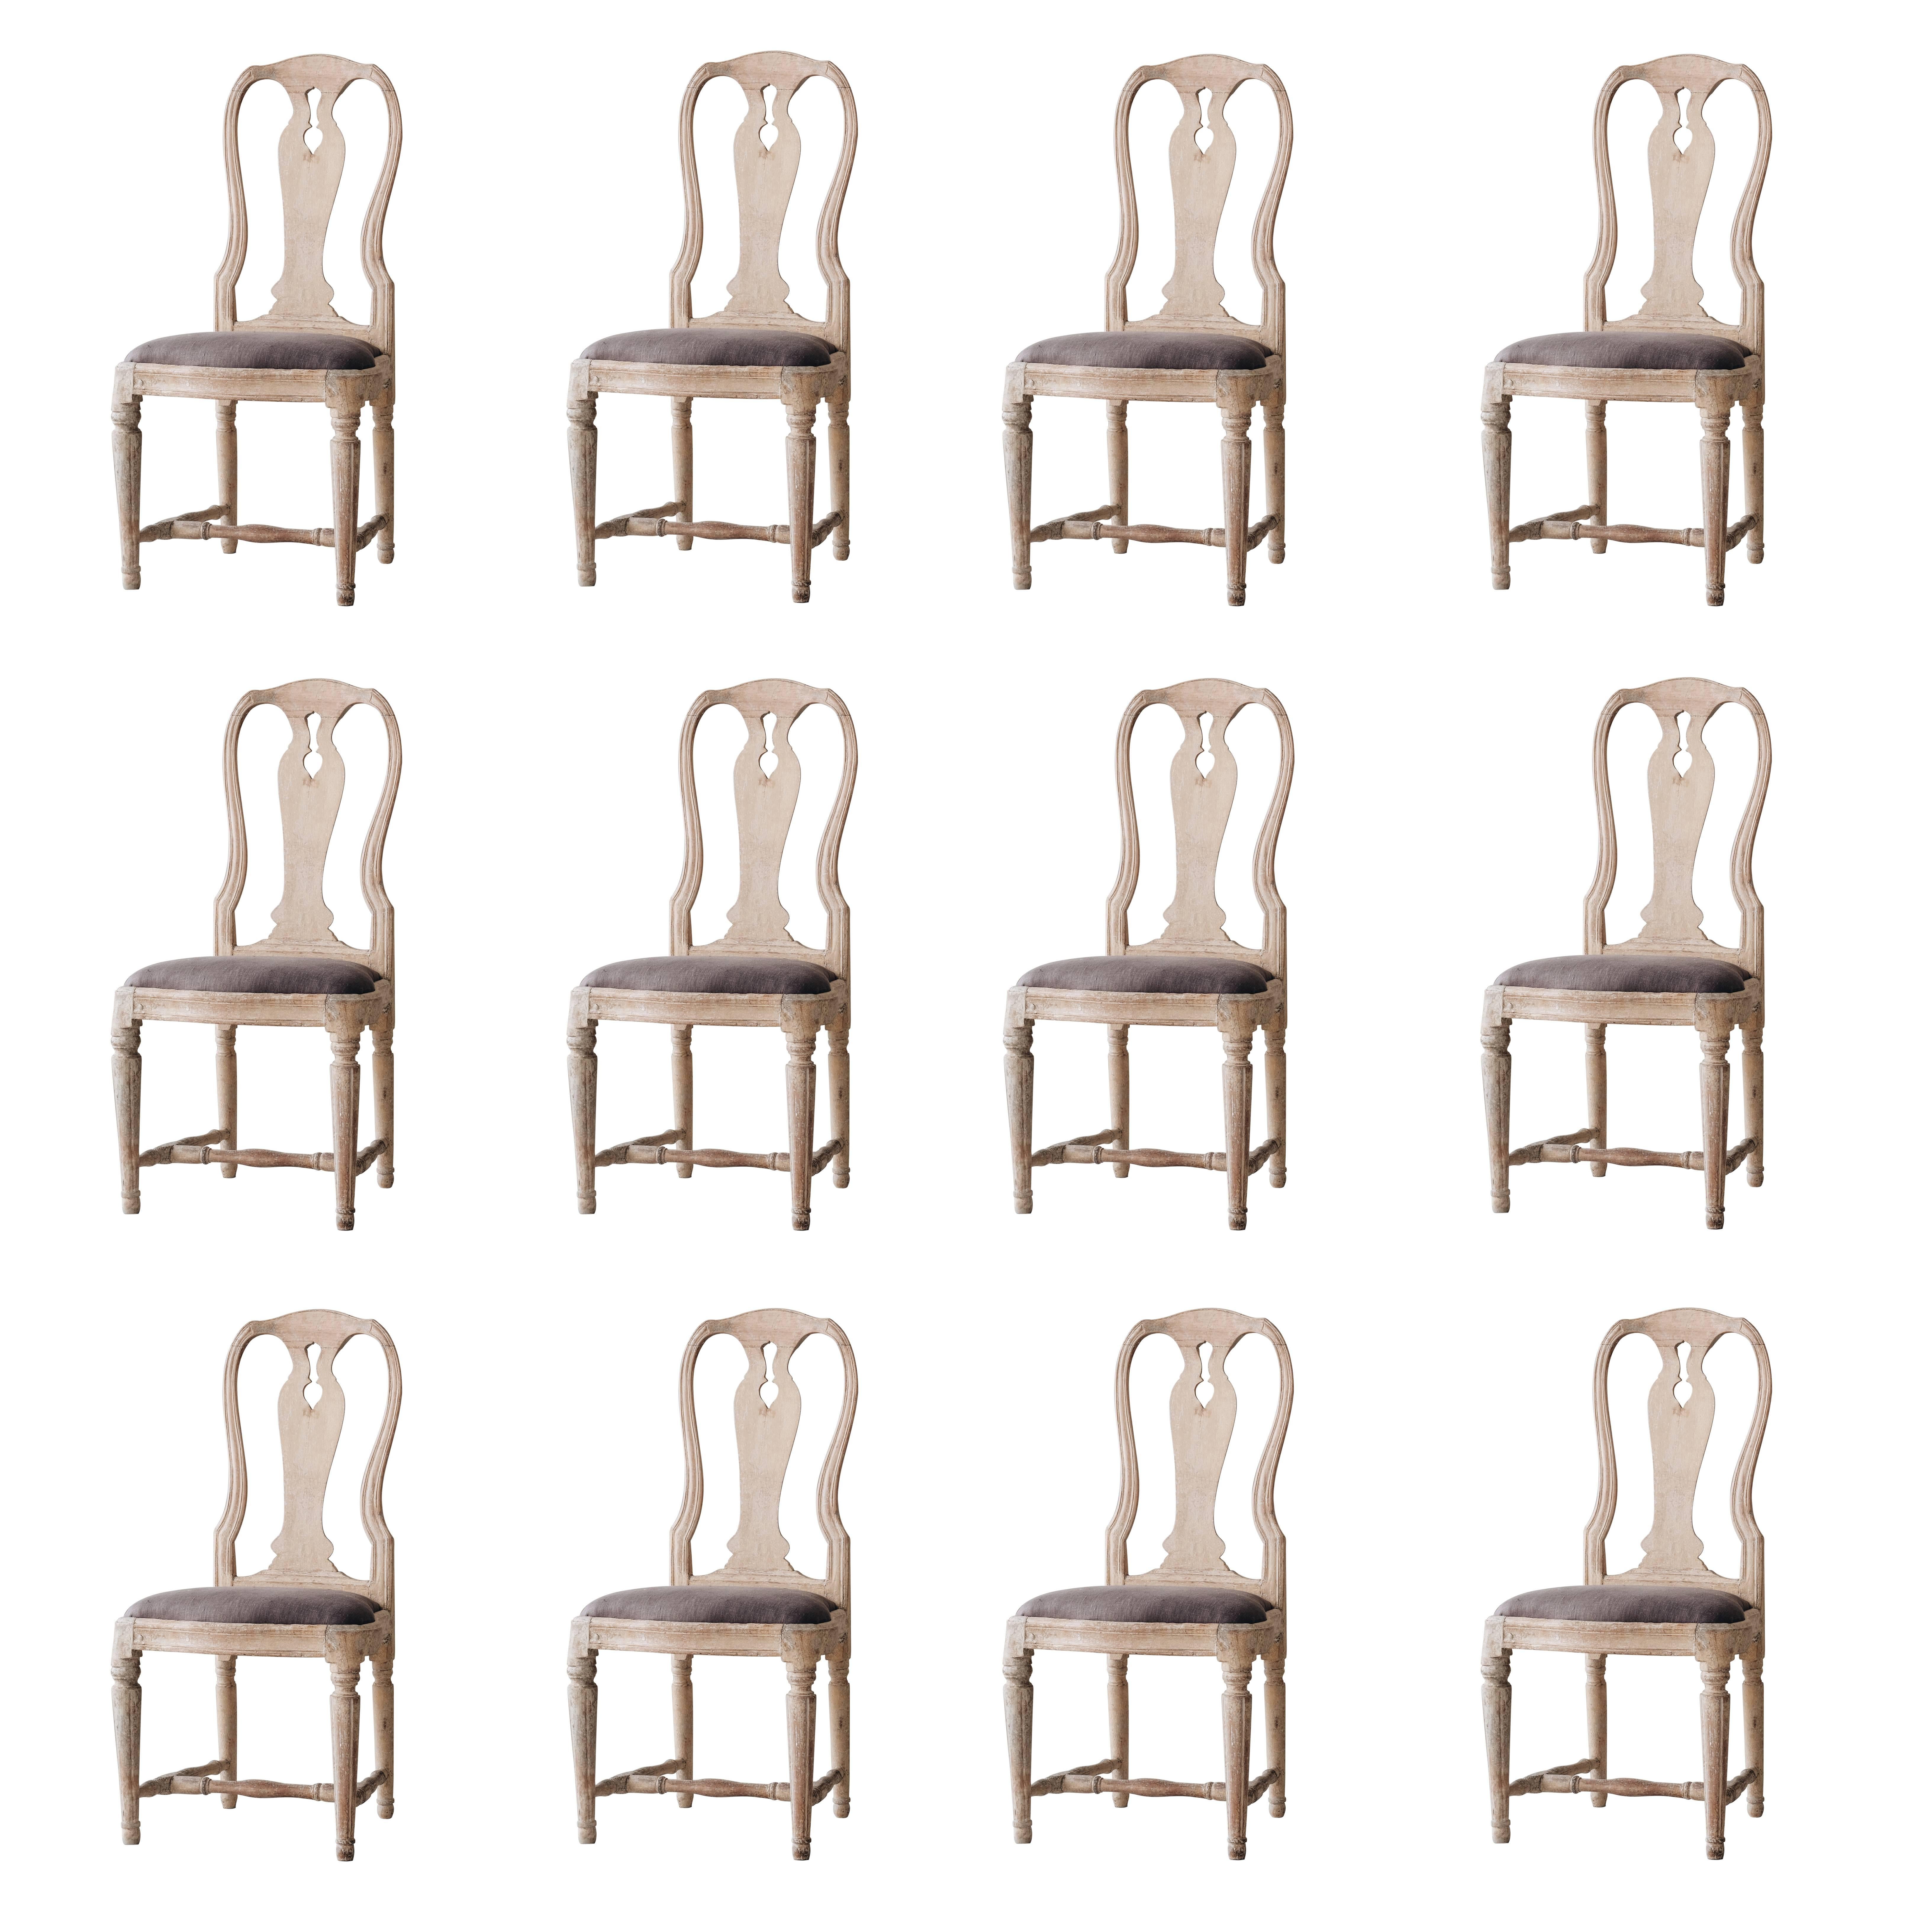 Set of 12 Transitional Rococo, Gustavian Chairs, 18th Century